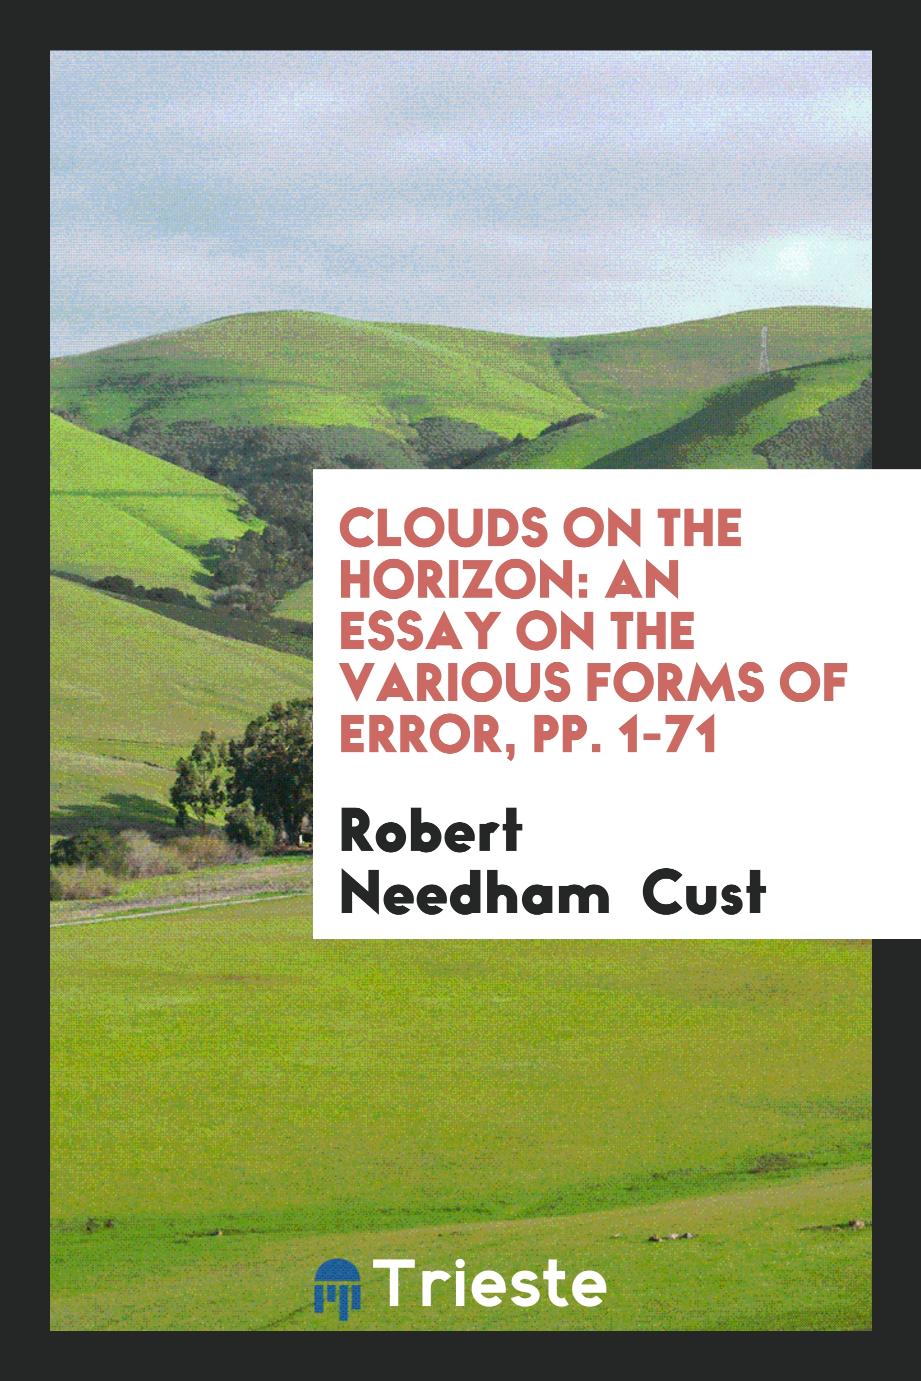 Clouds on the Horizon: An Essay on the Various Forms of Error, pp. 1-71